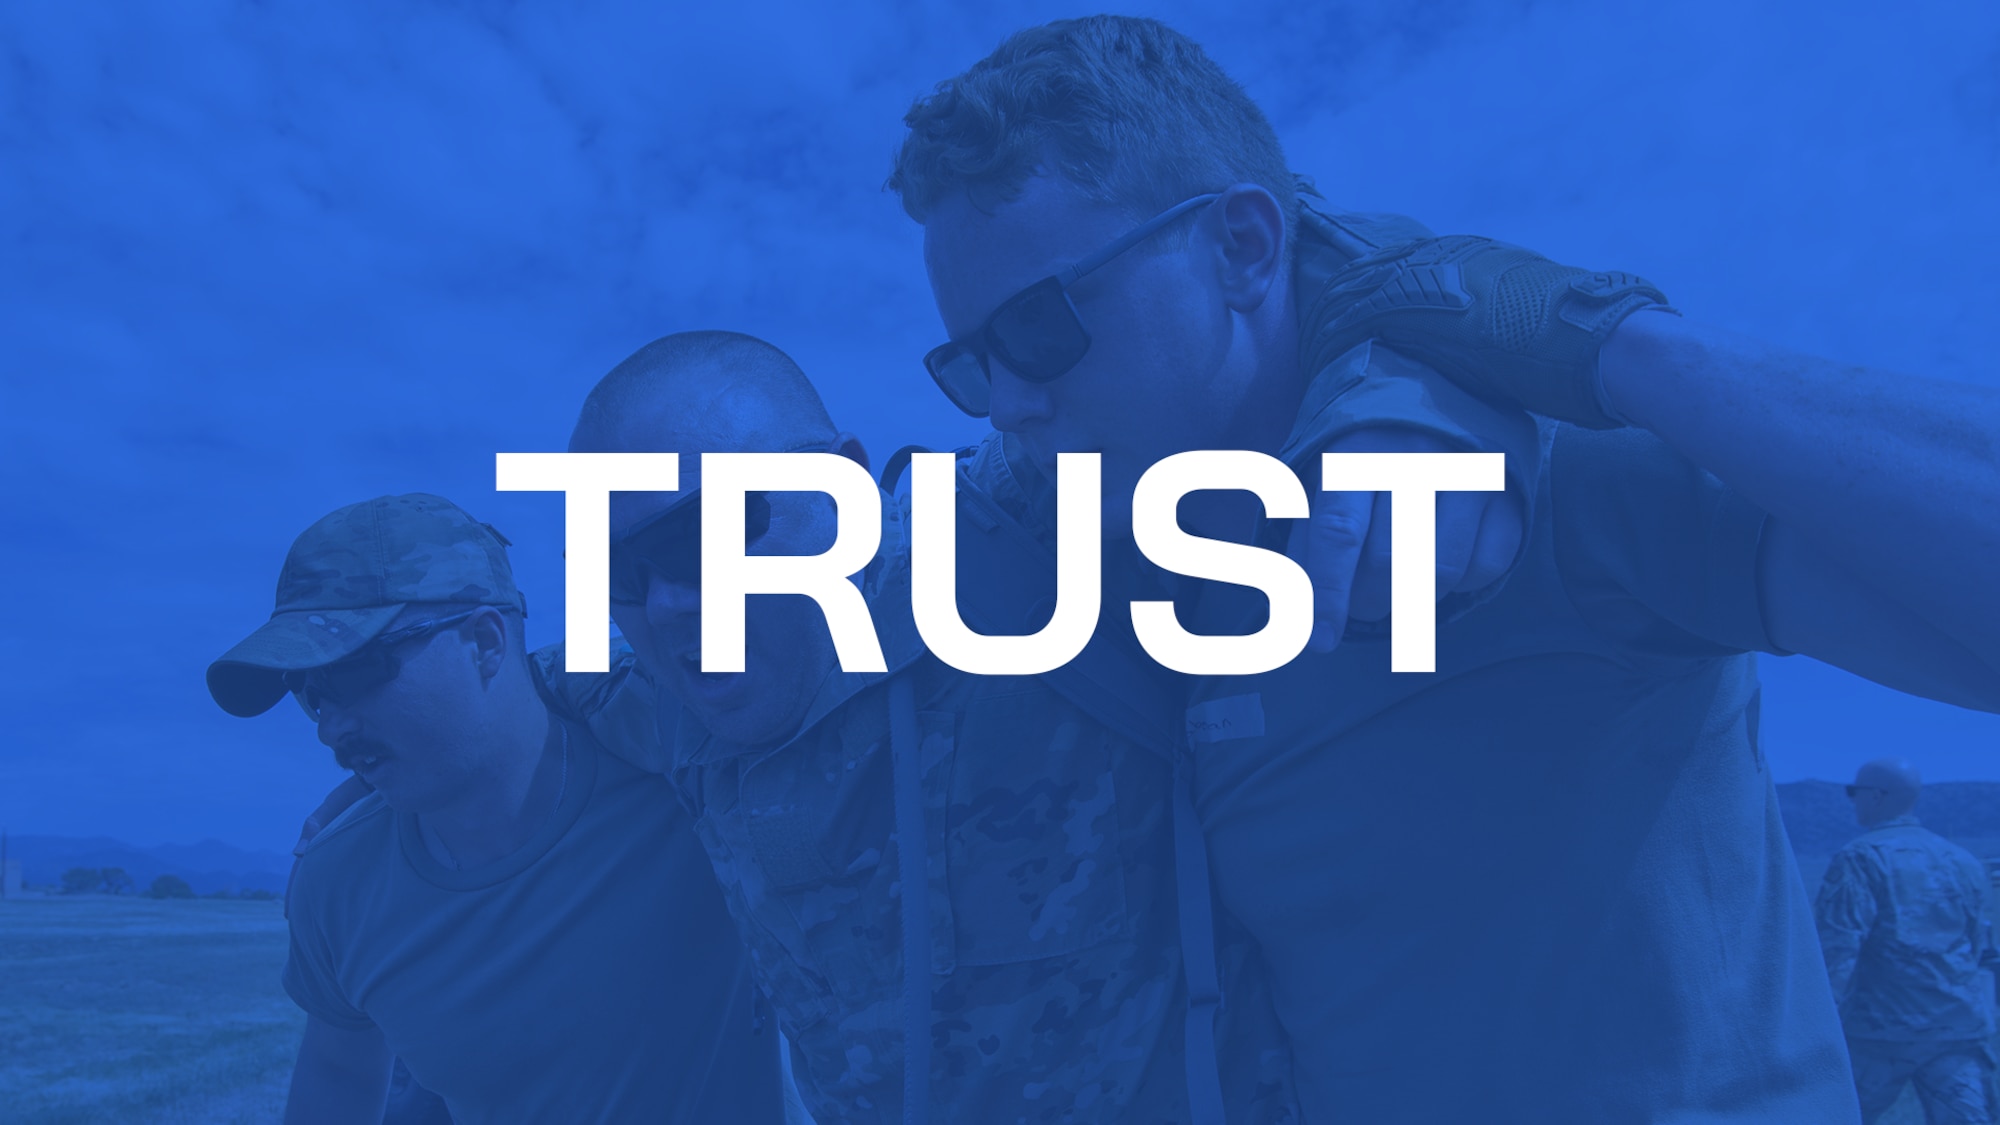 The word "TRUST" in capital letters with three servicemembers arm in arm with a blue overlay coloring the image.